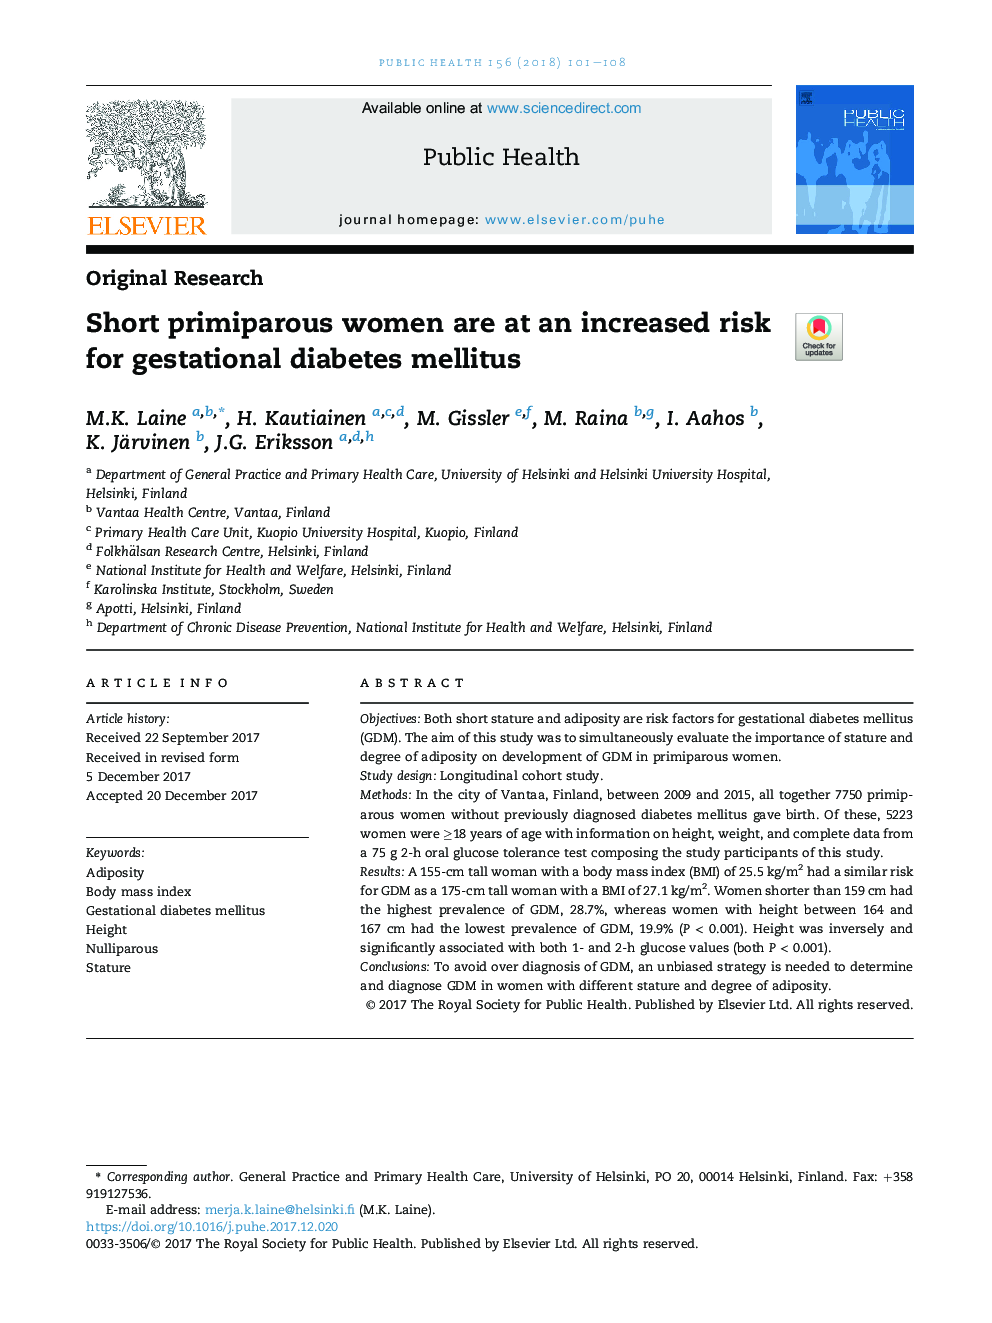 Short primiparous women are at an increased risk for gestational diabetes mellitus